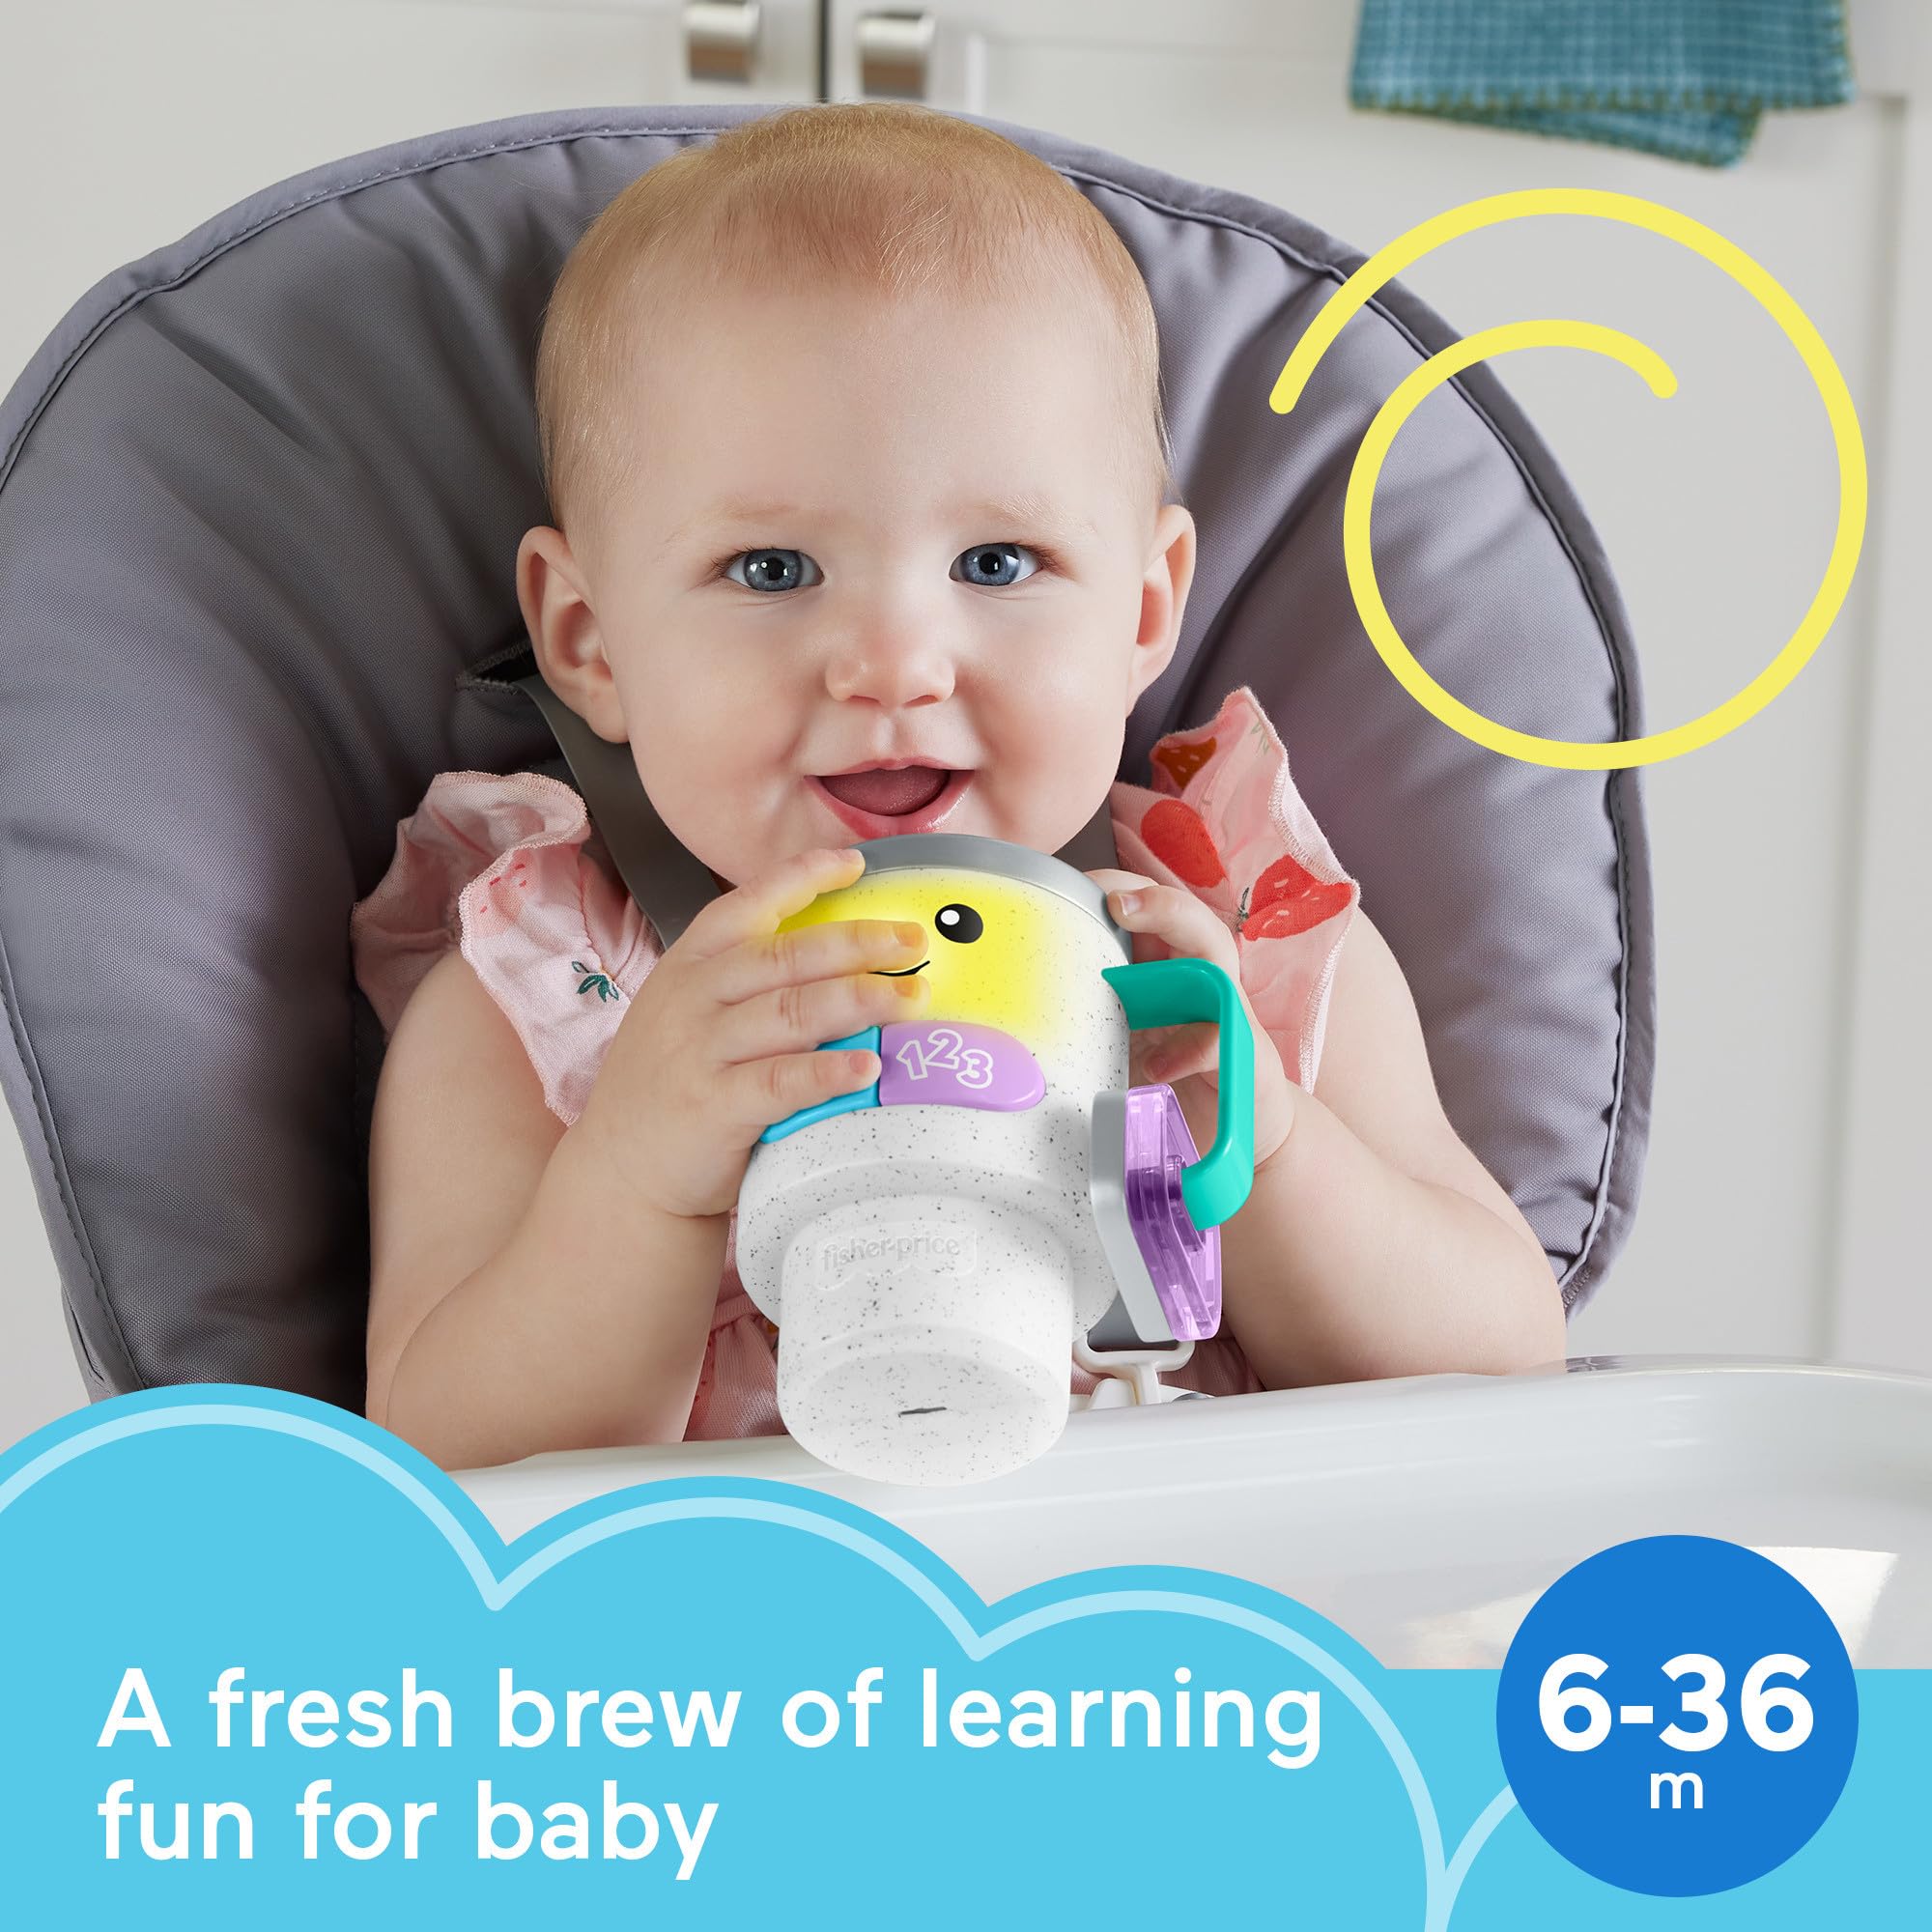 Fisher-Price Laugh & Learn Baby & Toddler Toy Wake Up & Learn Coffee Mug with Lights Music and Learning Content for Ages 6+ Months